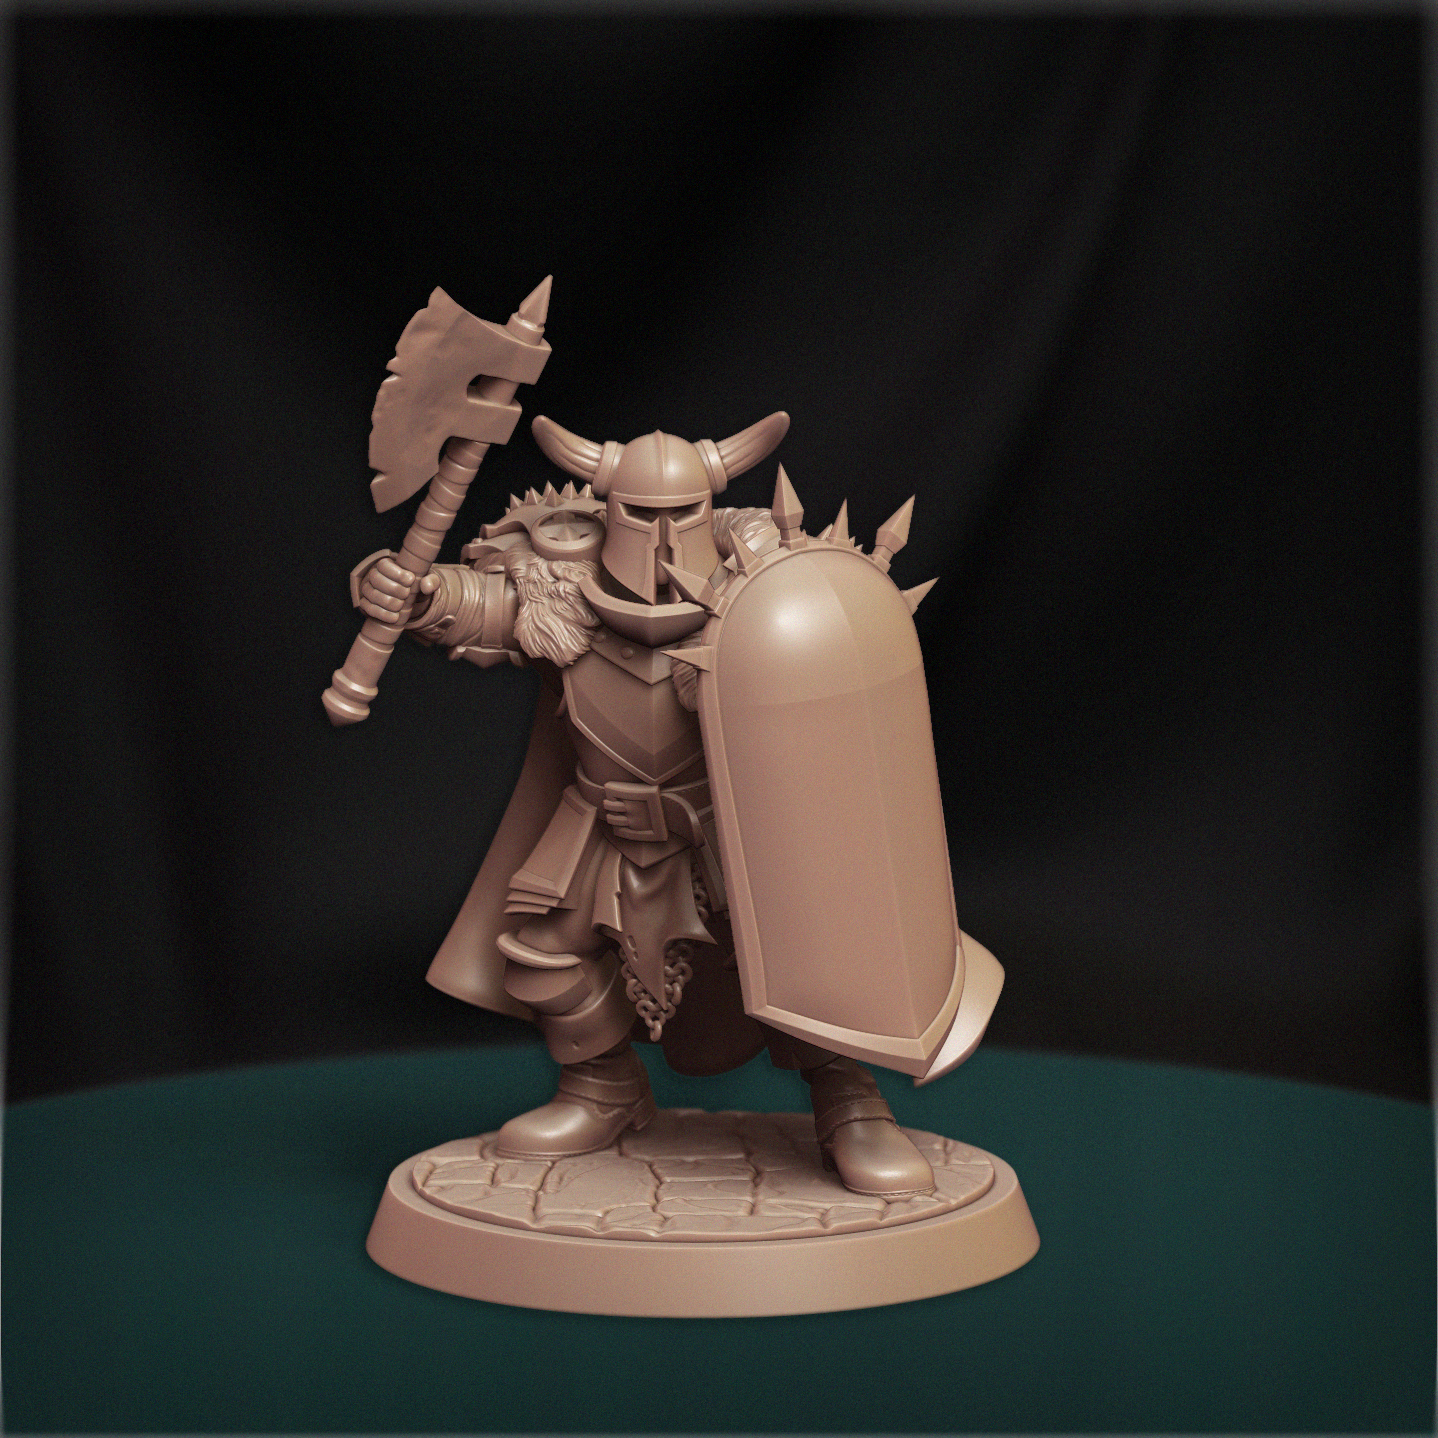 3D Printable Teya Sacred Valkyrie FREE by Lion Heart Forge